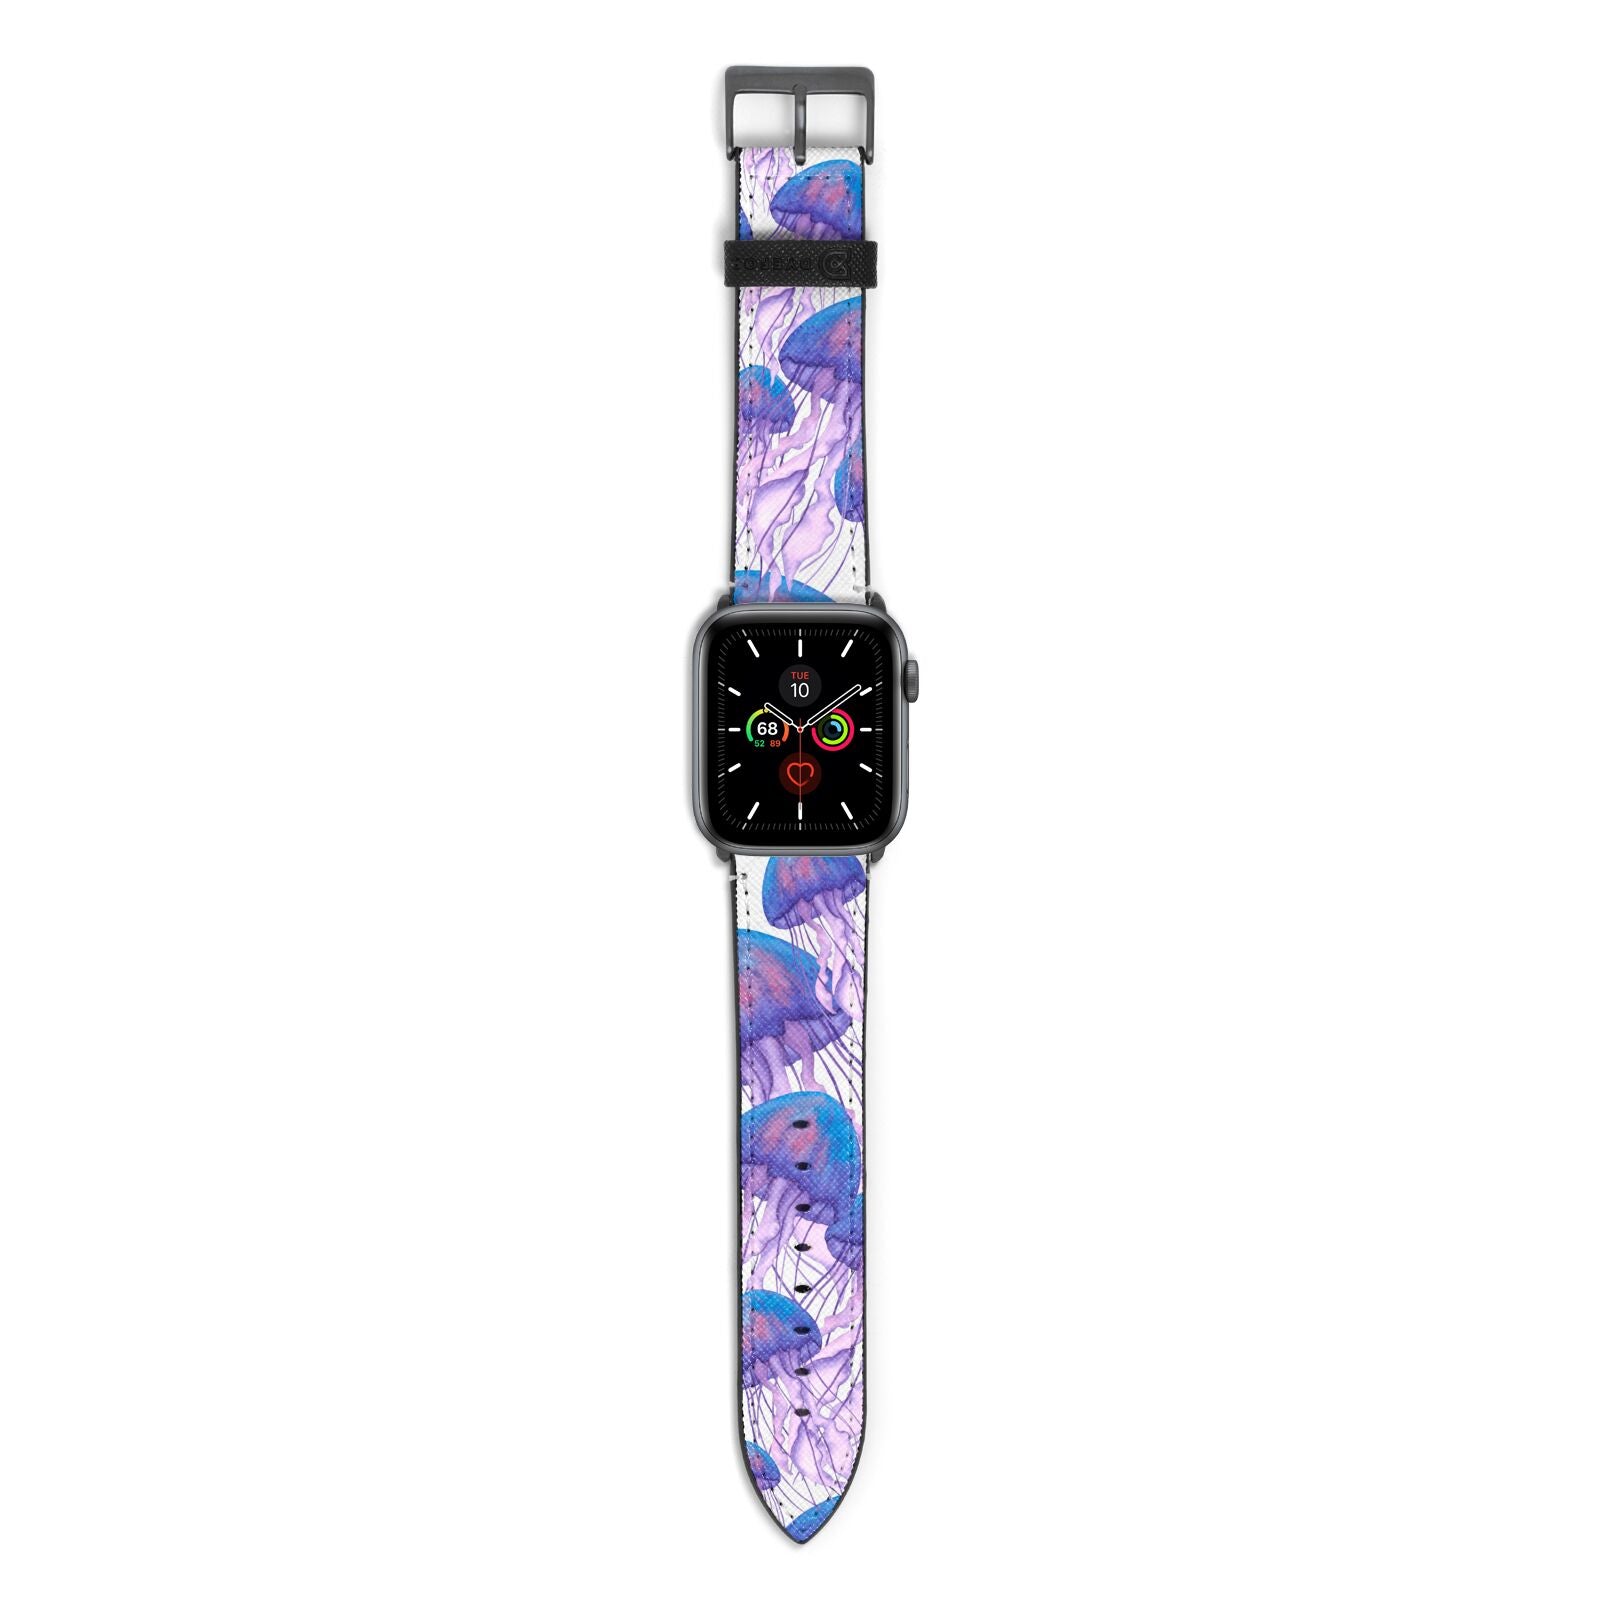 Jellyfish Apple Watch Strap with Space Grey Hardware